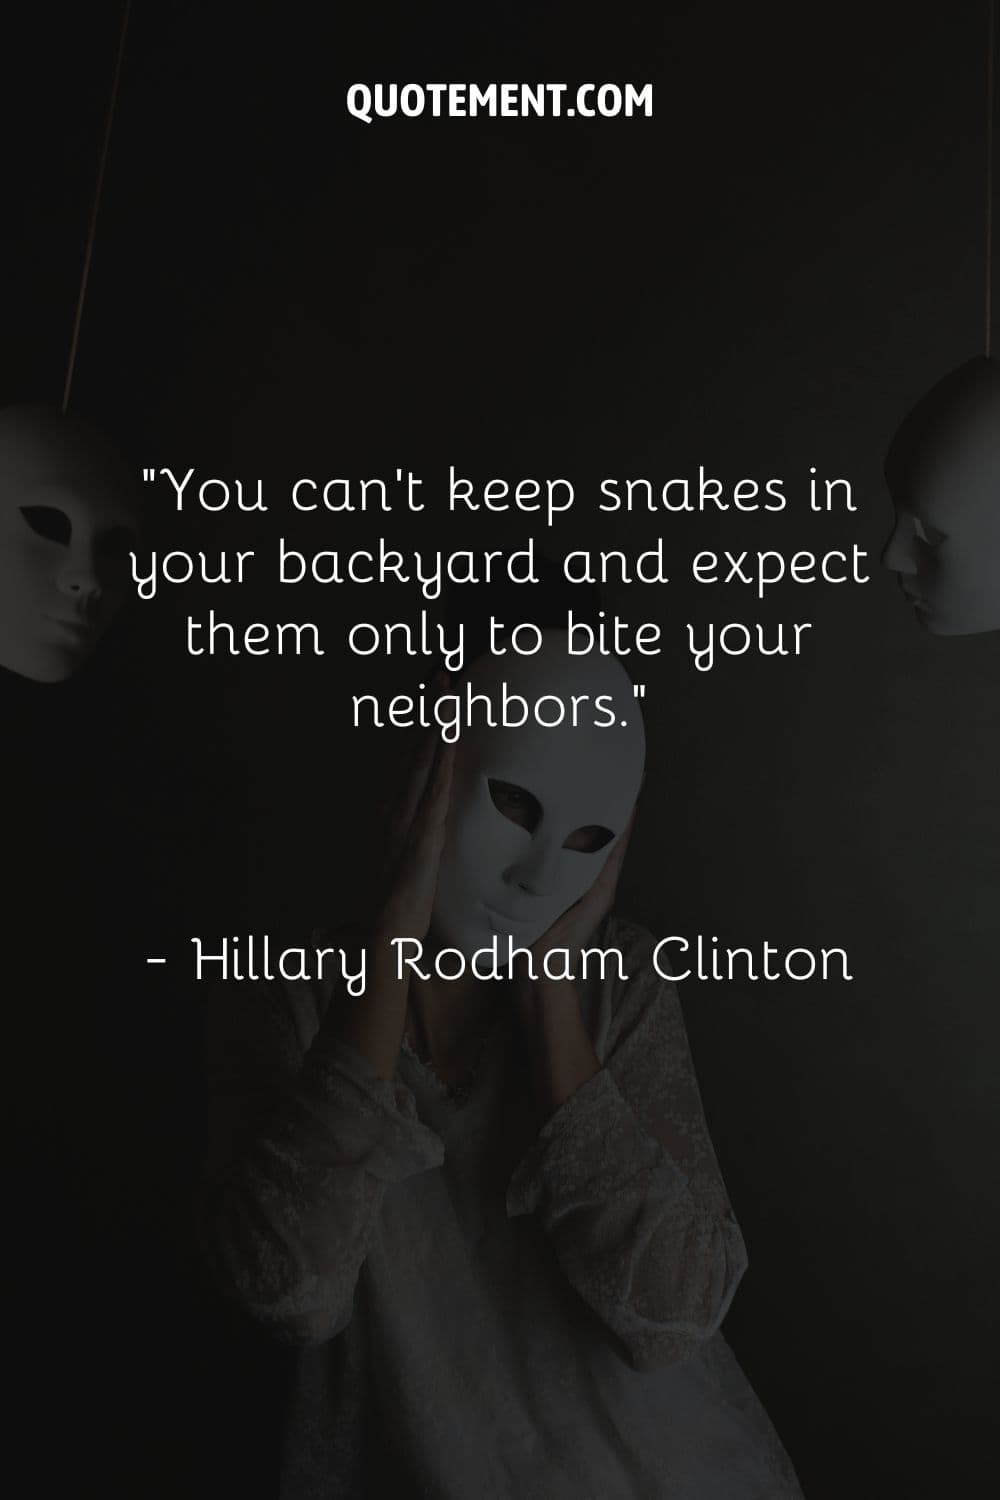 You can't keep snakes in your backyard and expect them only to bite your neighbors